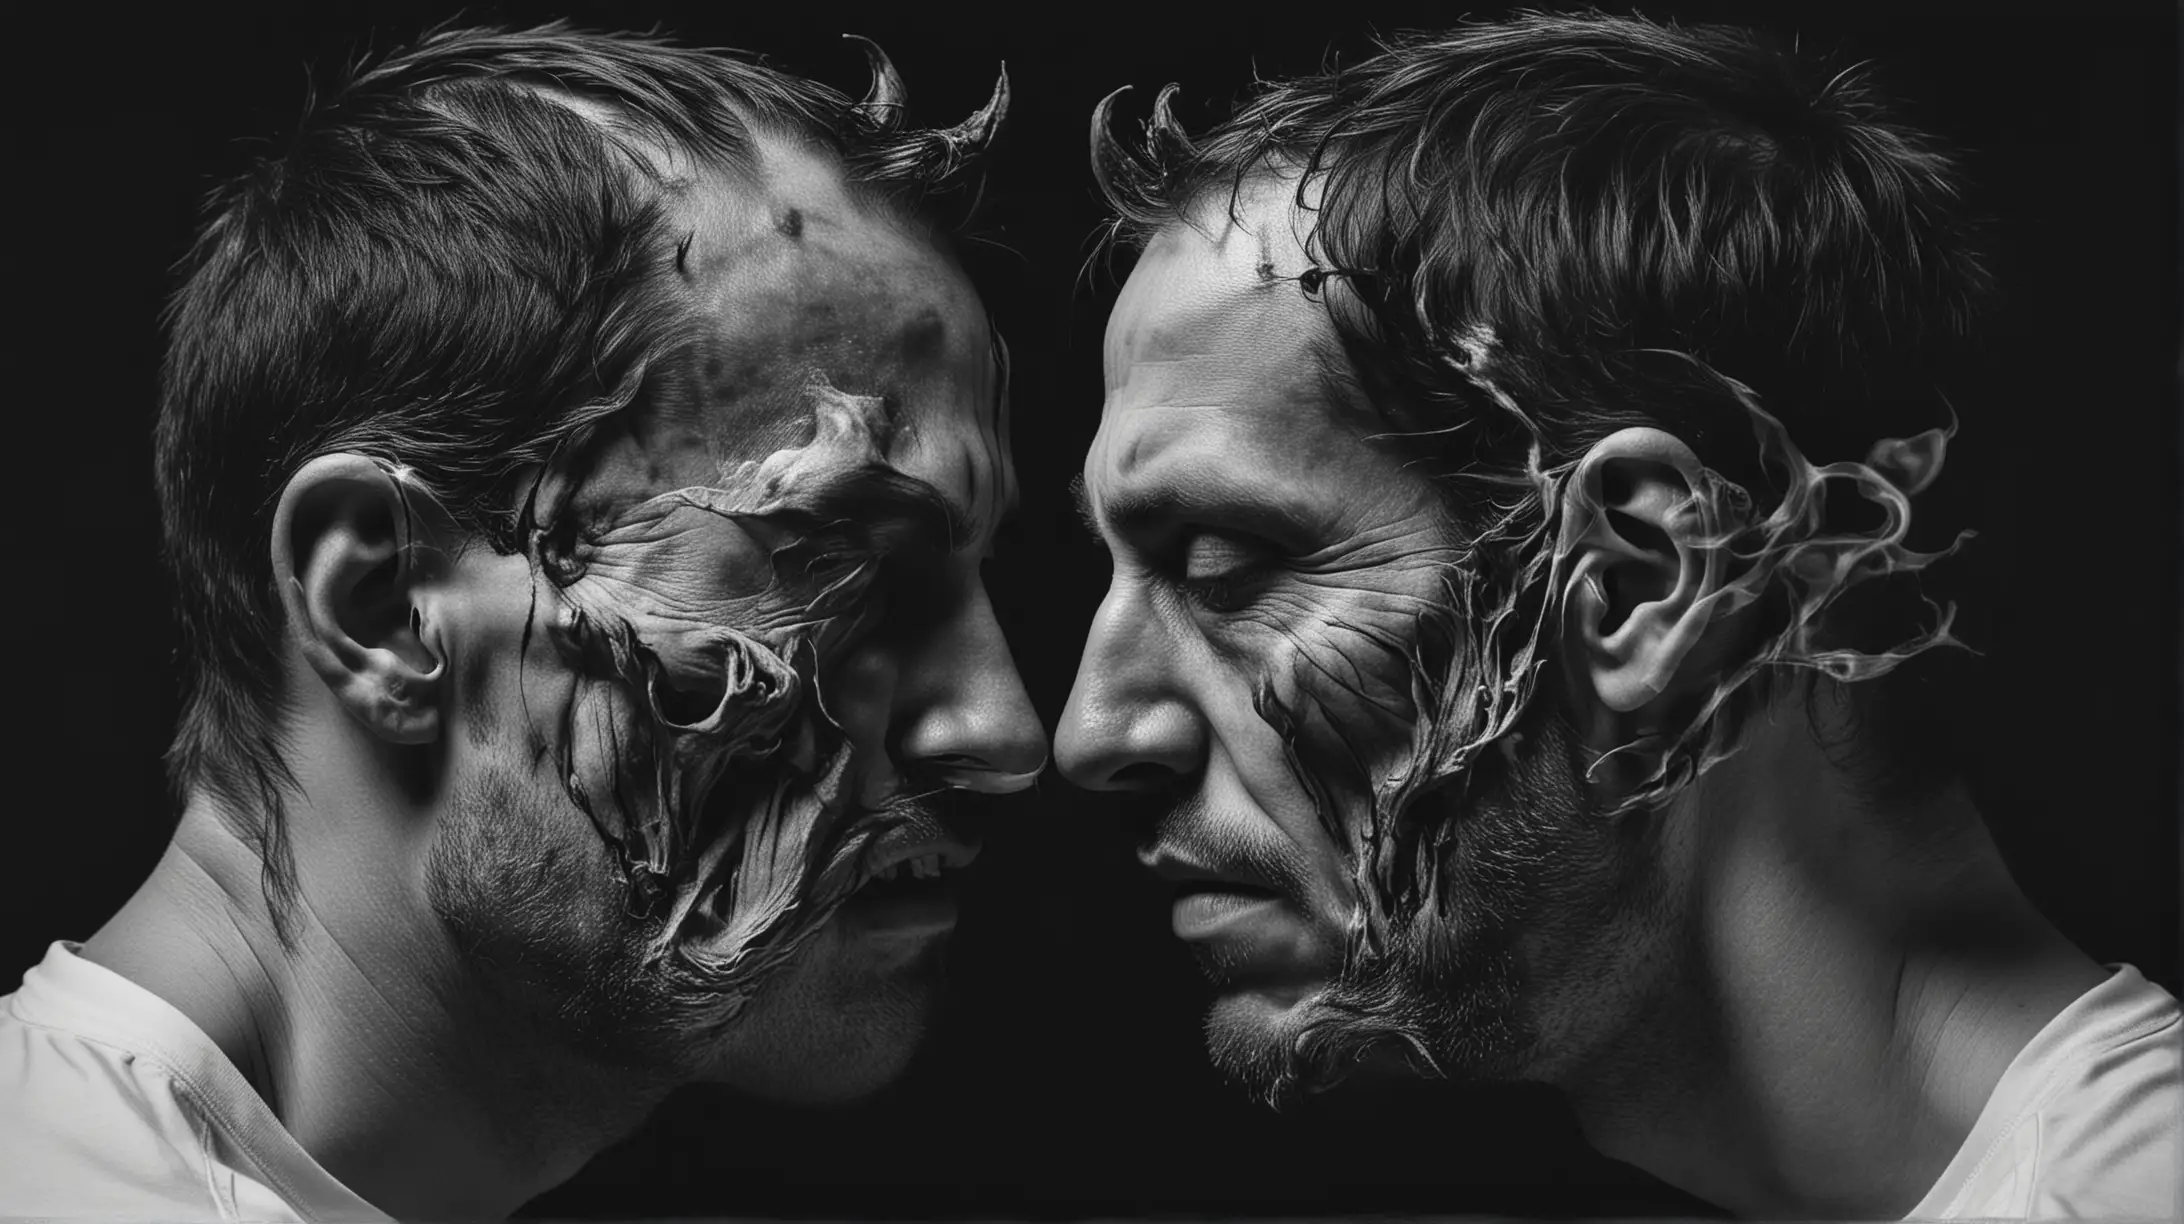 Surreal Art Photography Distorted Faces in Black and White